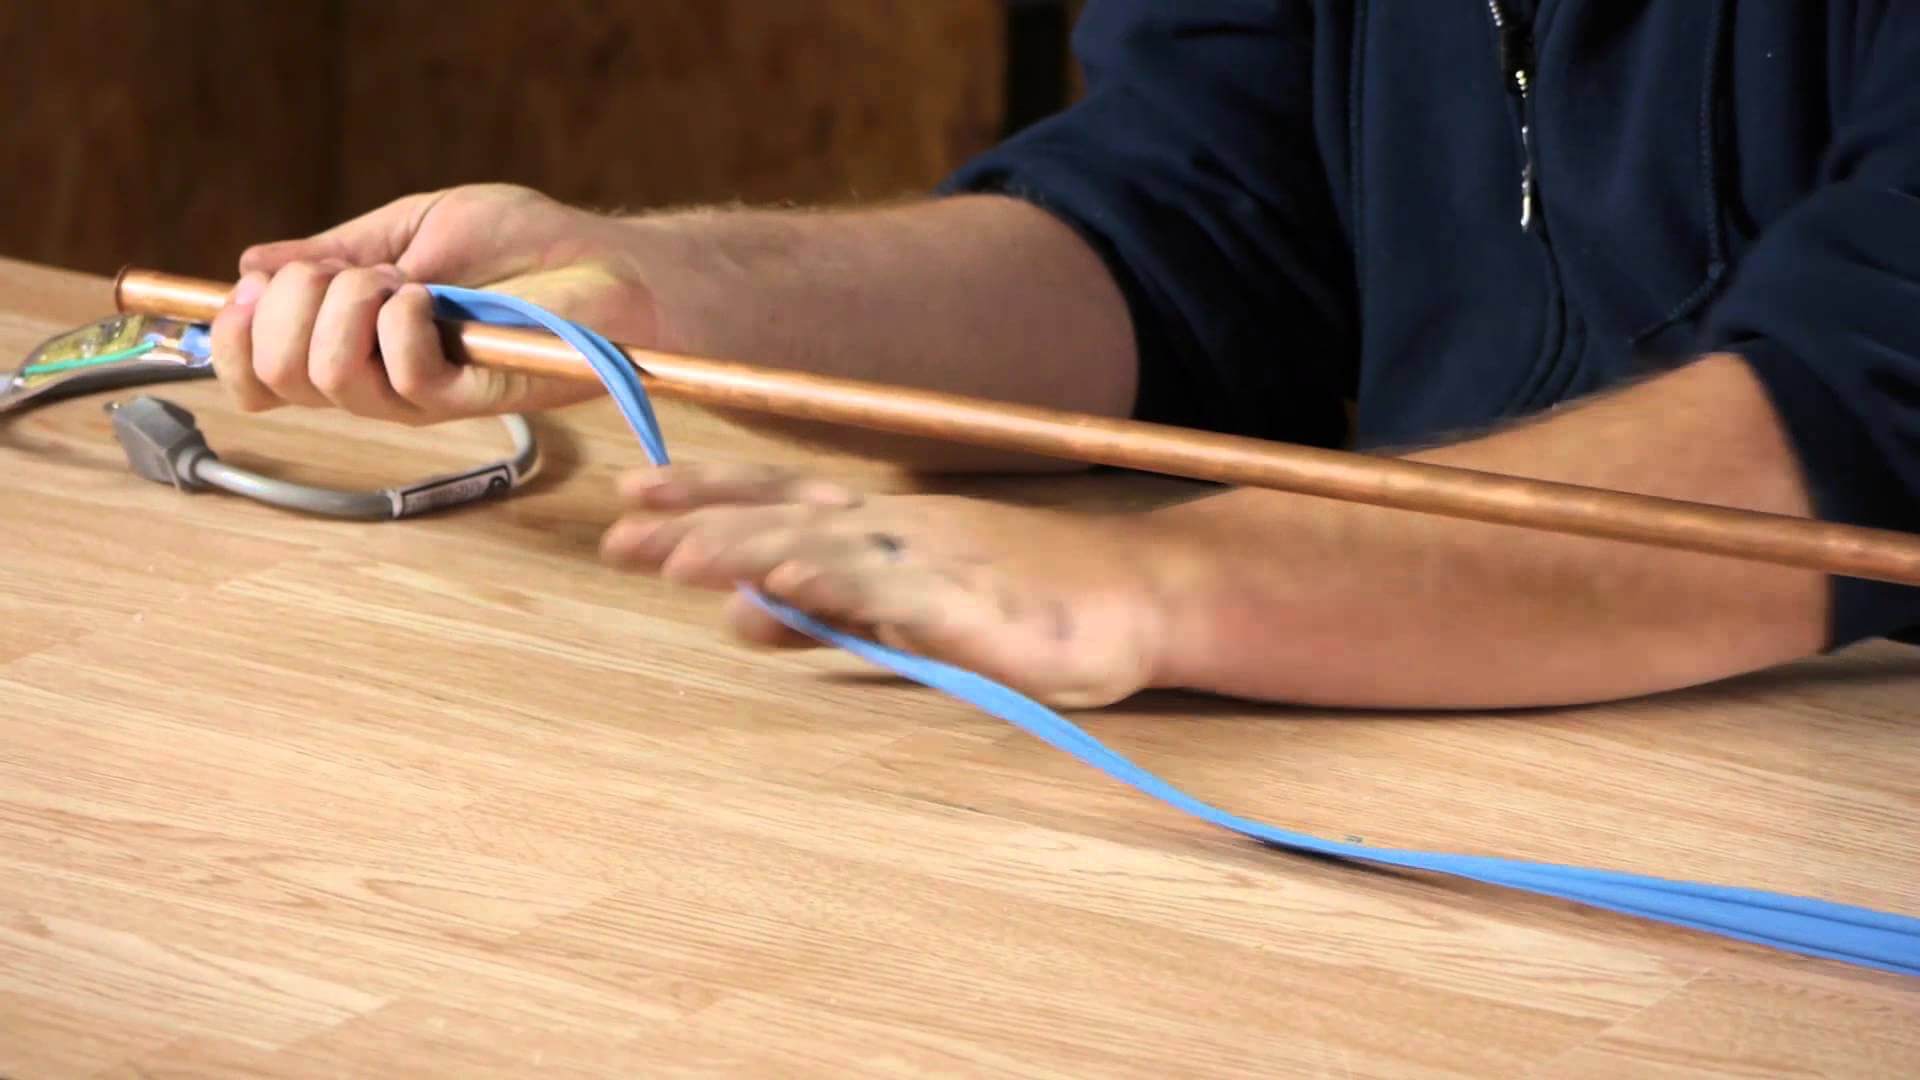 Install a Heating Cable